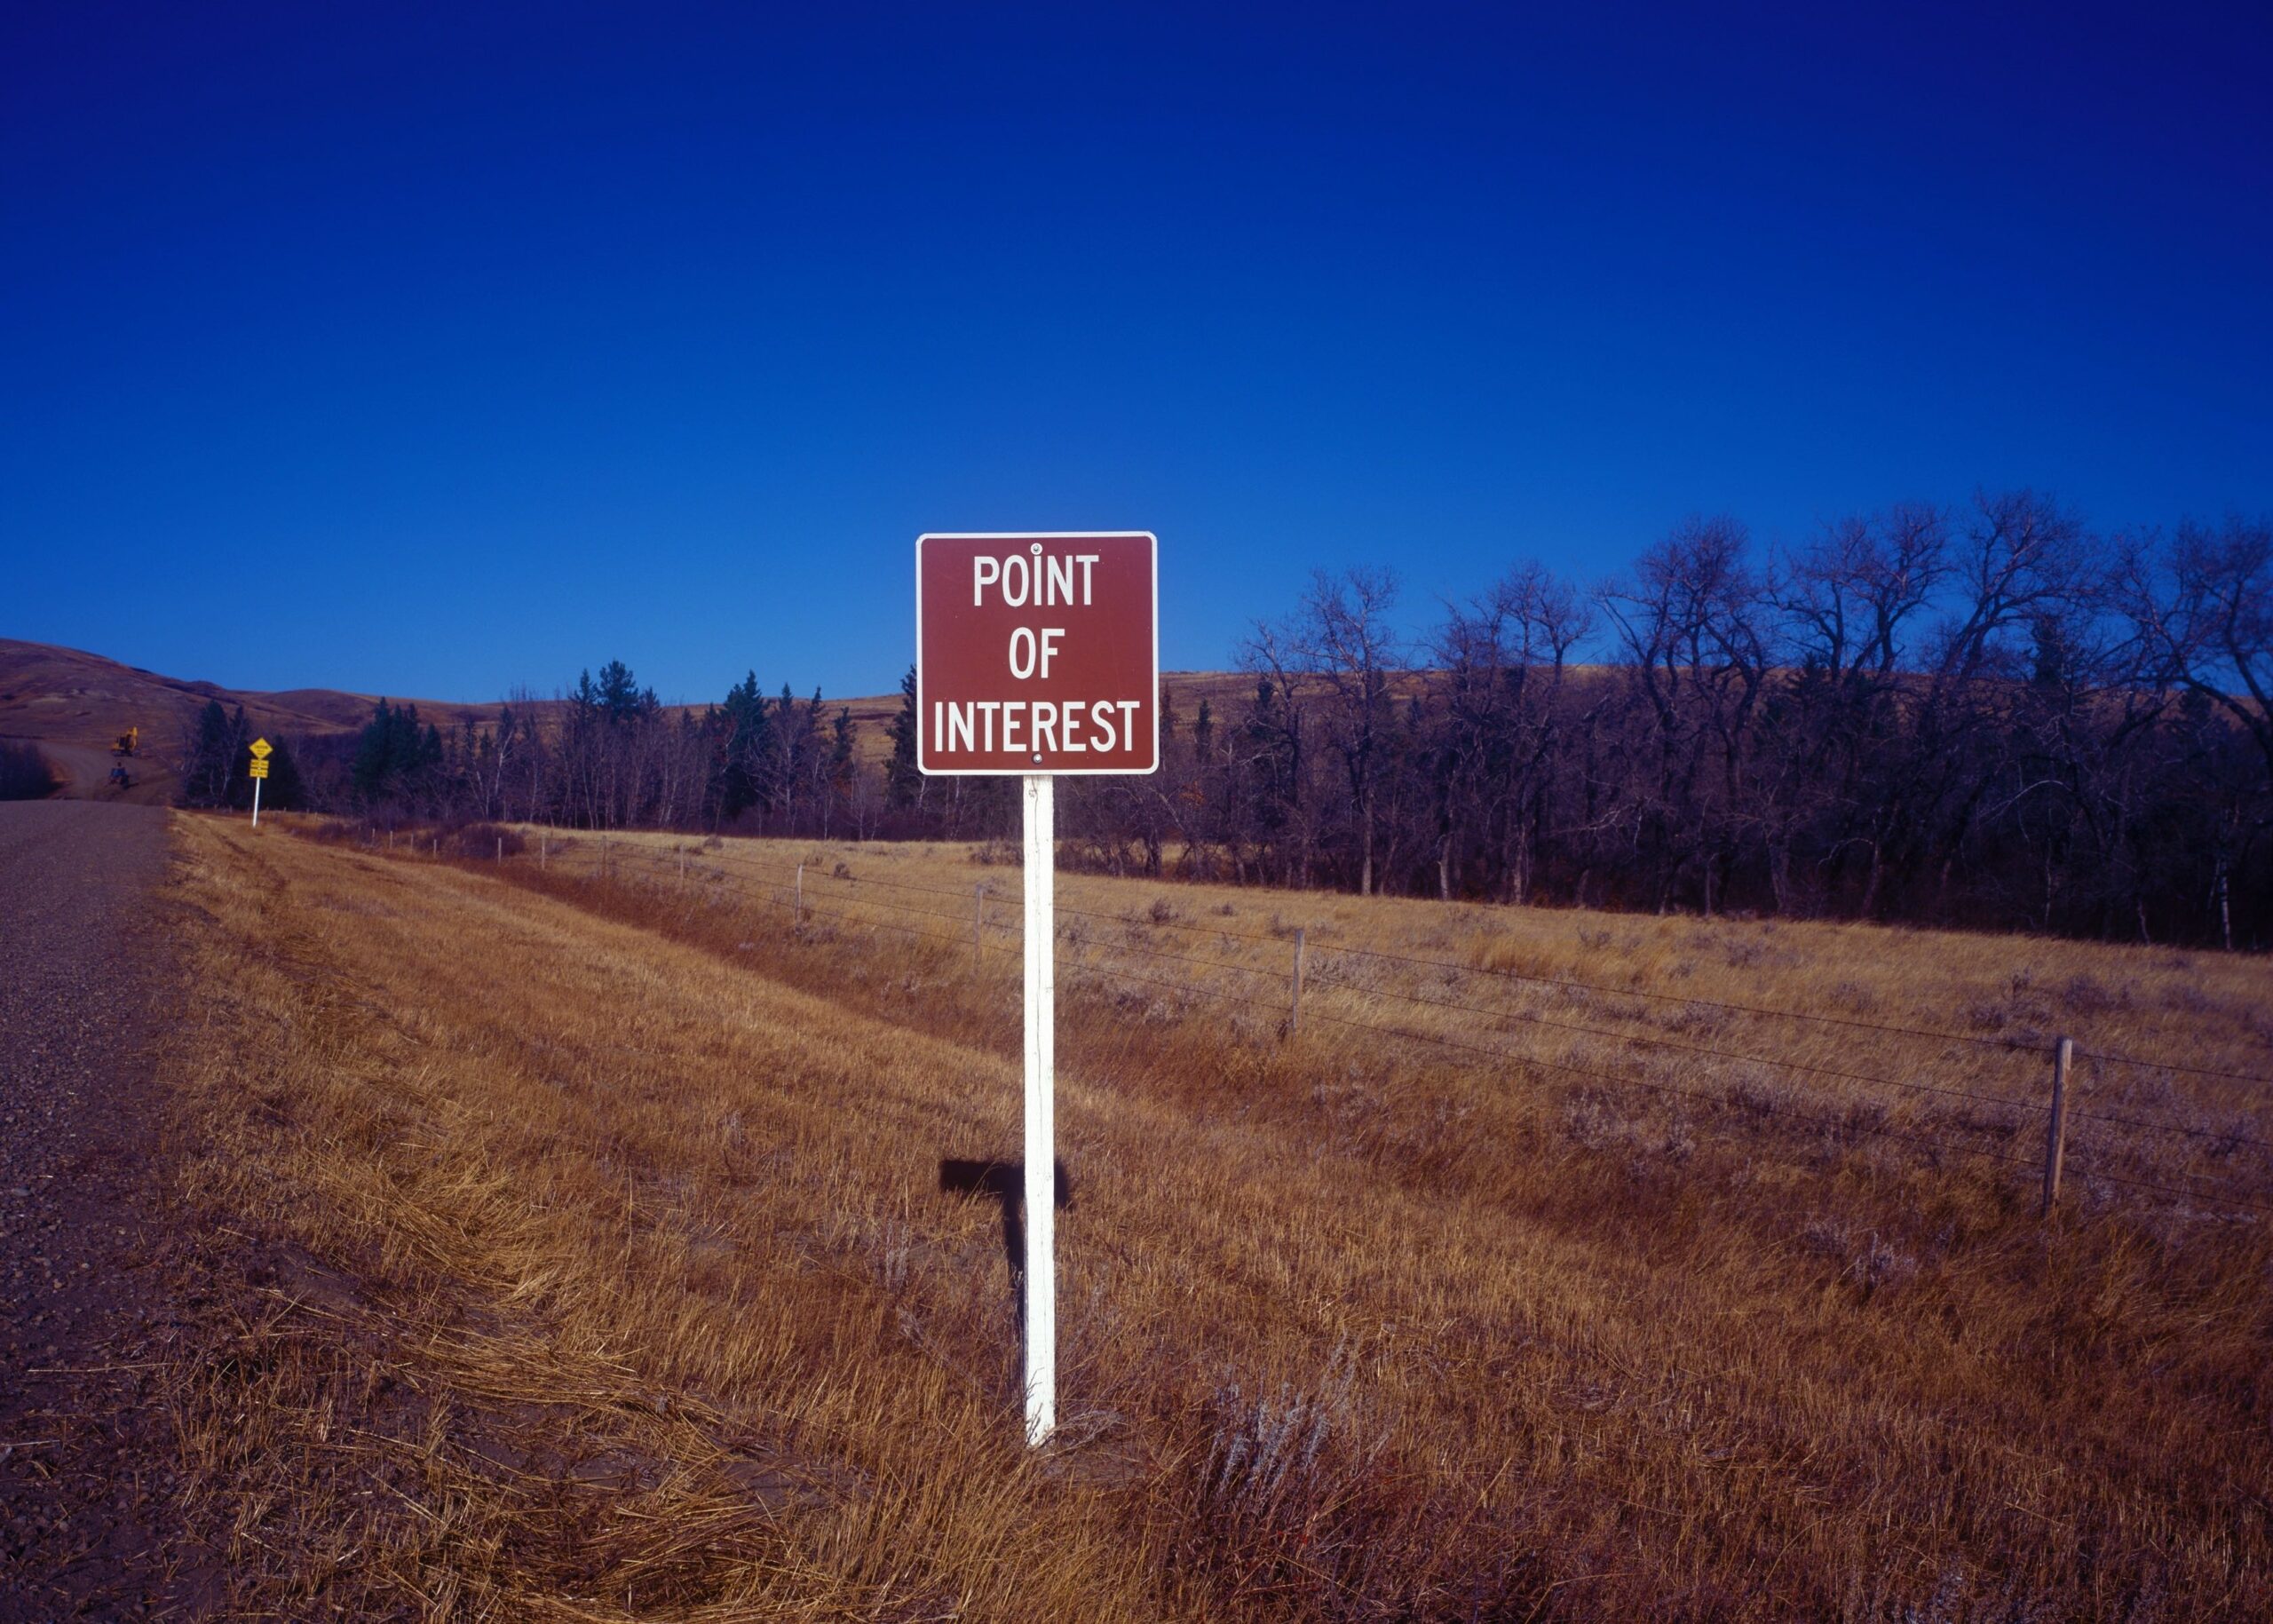 Marlene Creates, Points of Interest, Saskatchewan 1999 (detail), 1999, colour Endurochrome photographic prints, 12 photographs each measuring 61 x 91.4 cm. Collection of Remai Modern. Purchased with the support of the Frank and Ellen Remai Foundation, 2019.